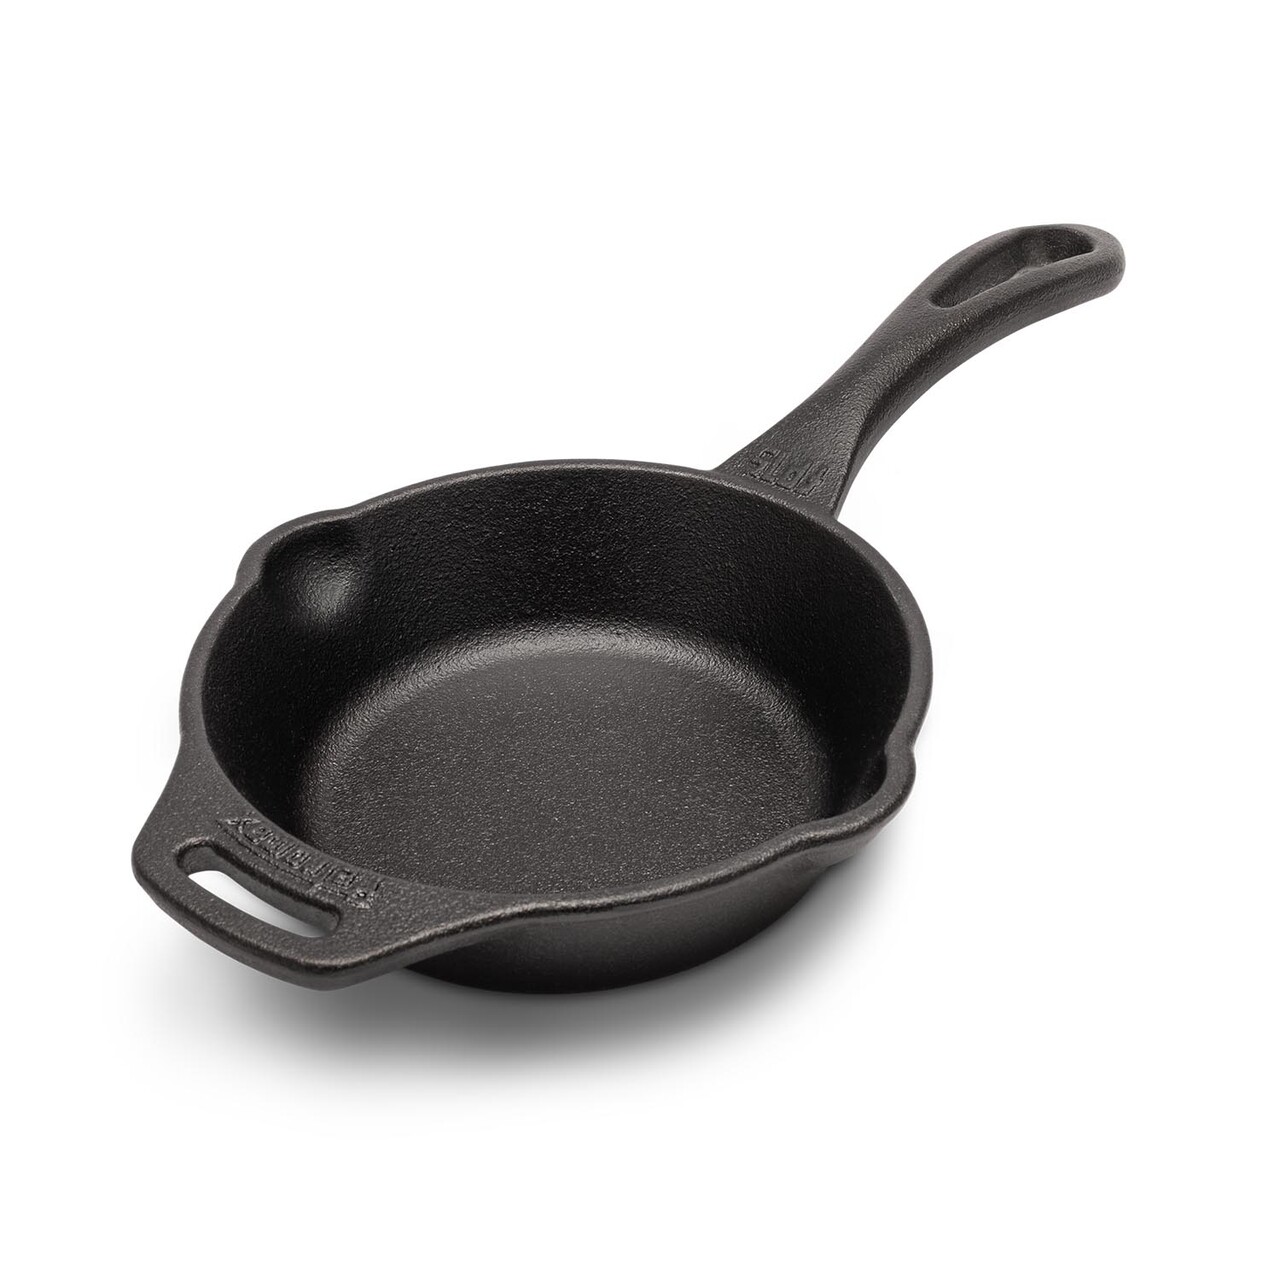 12: Petromax Fire Skillet Fp15 With One Pan Handle - Pande